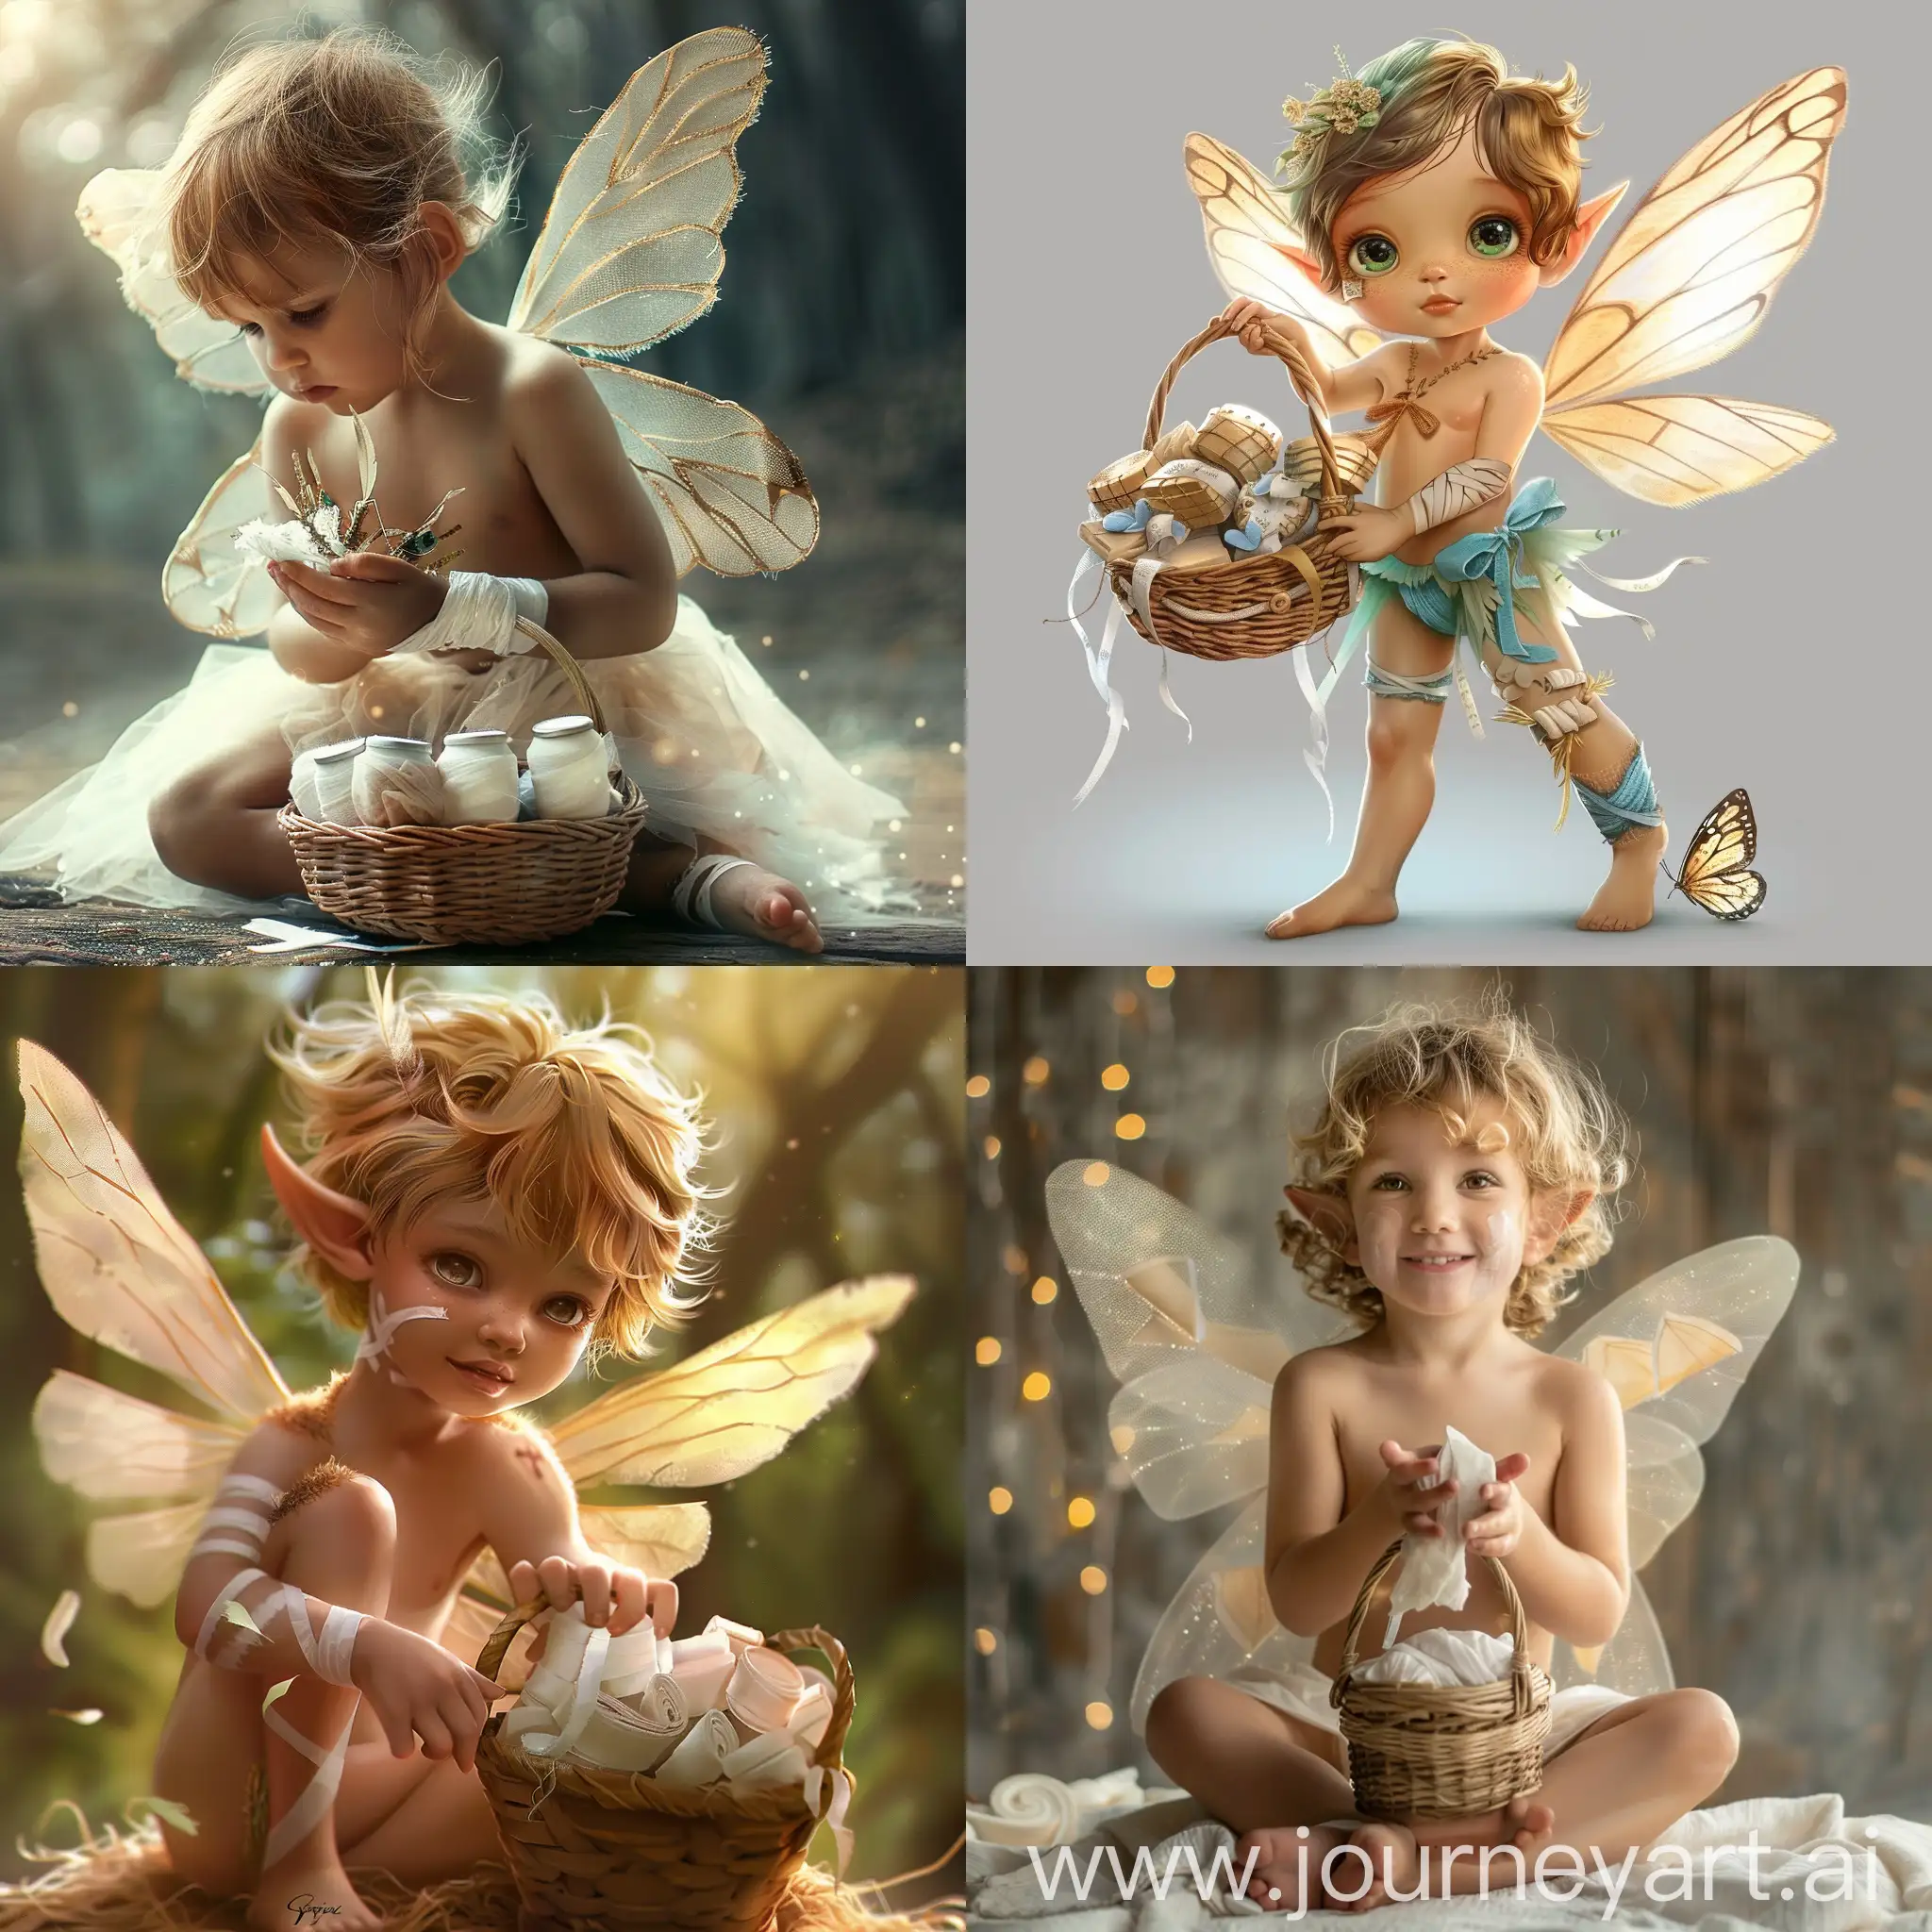 Adorable-Fantasy-Fairy-Child-with-Basket-of-Bandages